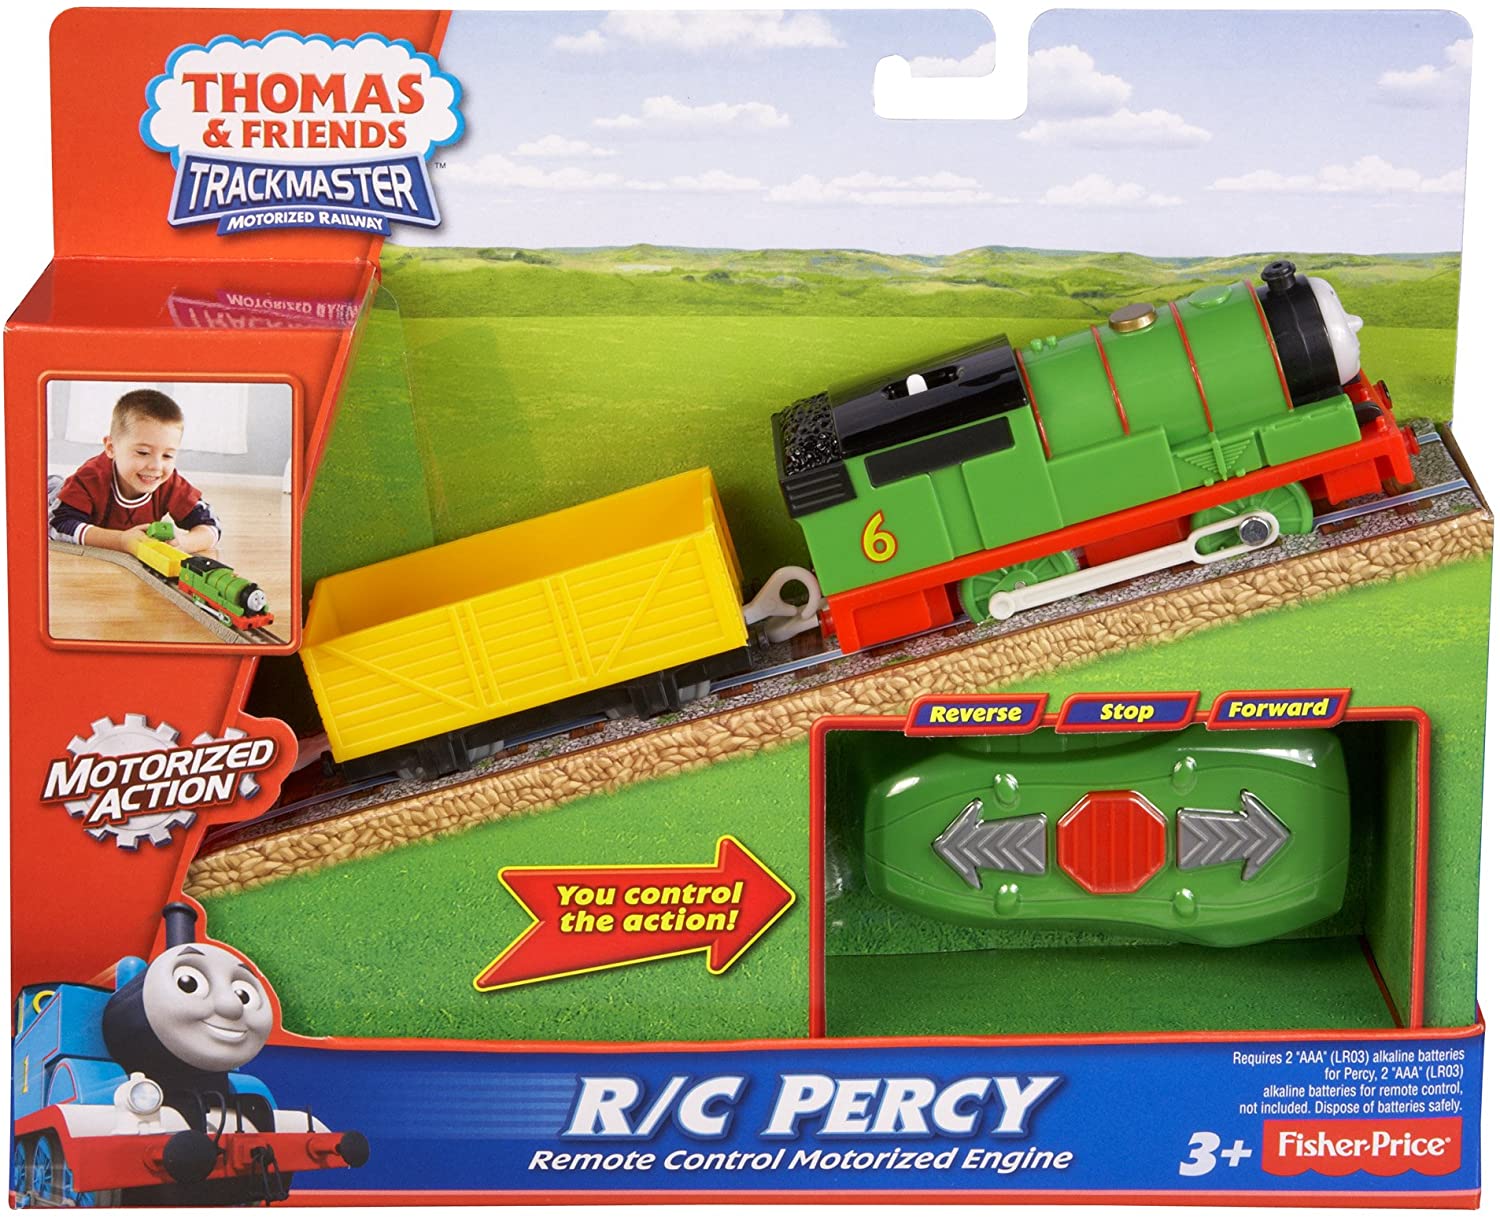 NEW Details about   Thomas & Friends Trackmaster R/C Percy 